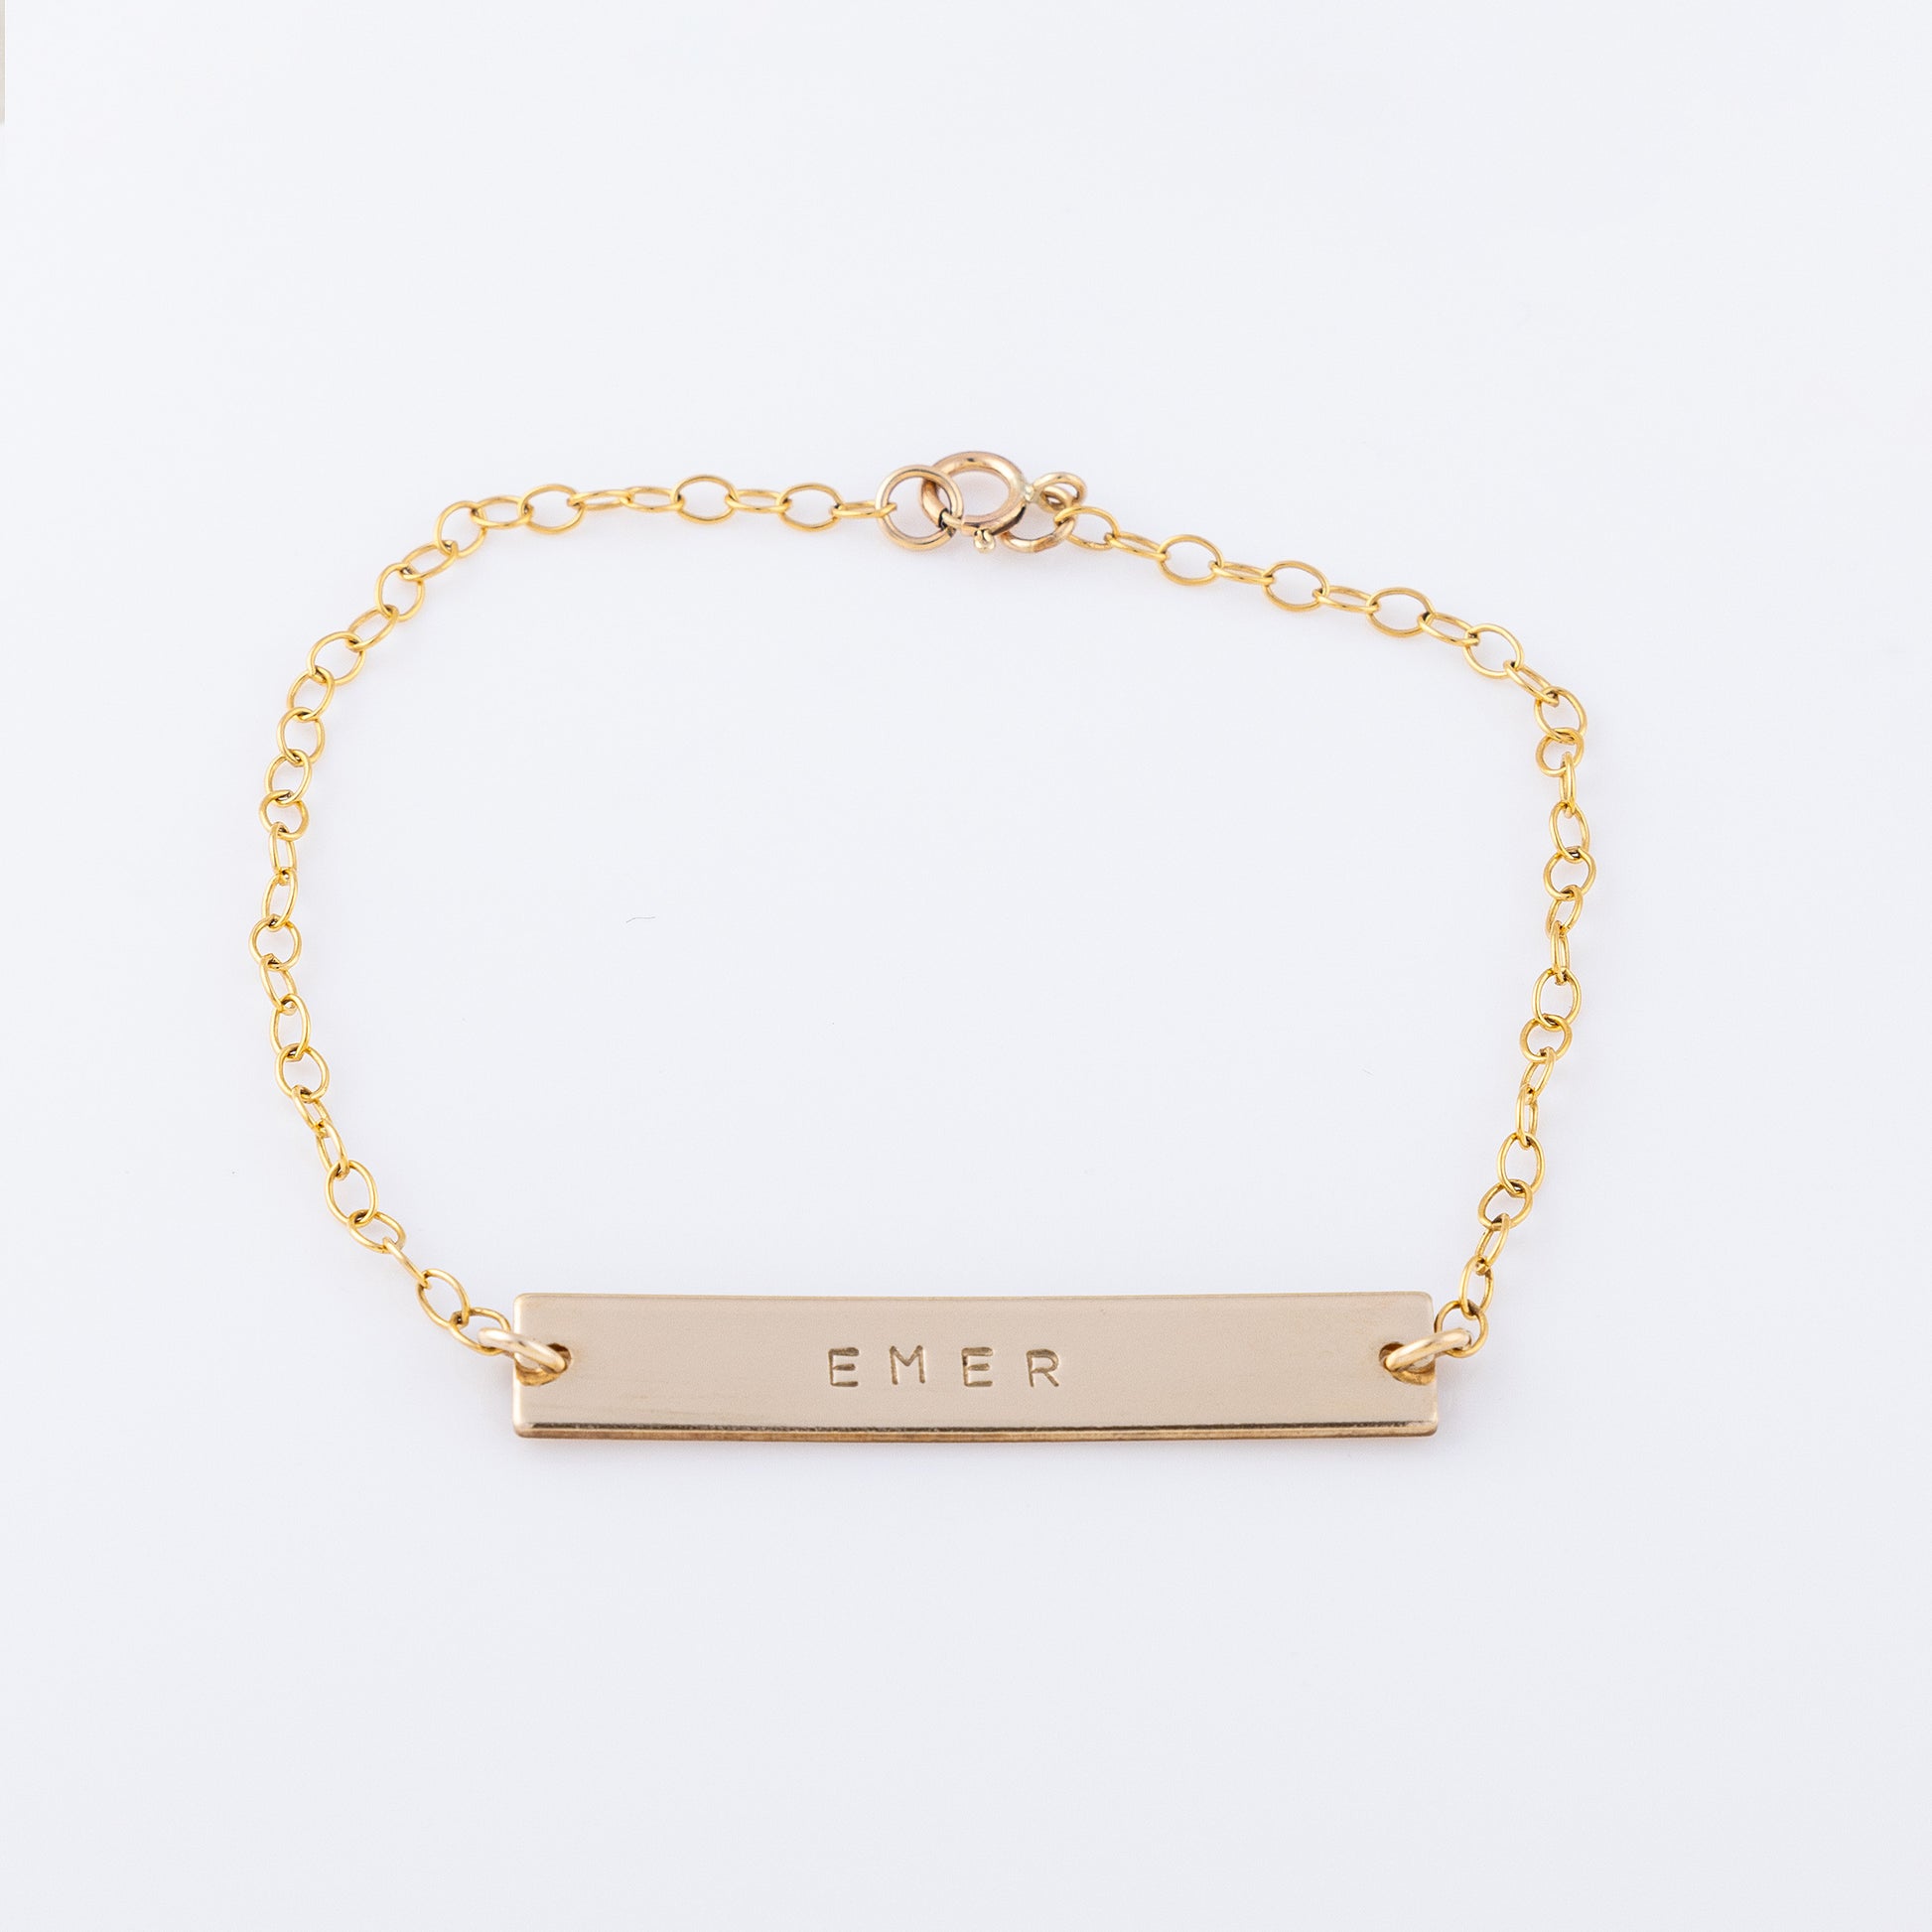 14ct gold-filled gold name bar bracelet. Smooth simple gold bar with name stamped across it on a dainty chain with a lobster clasp 